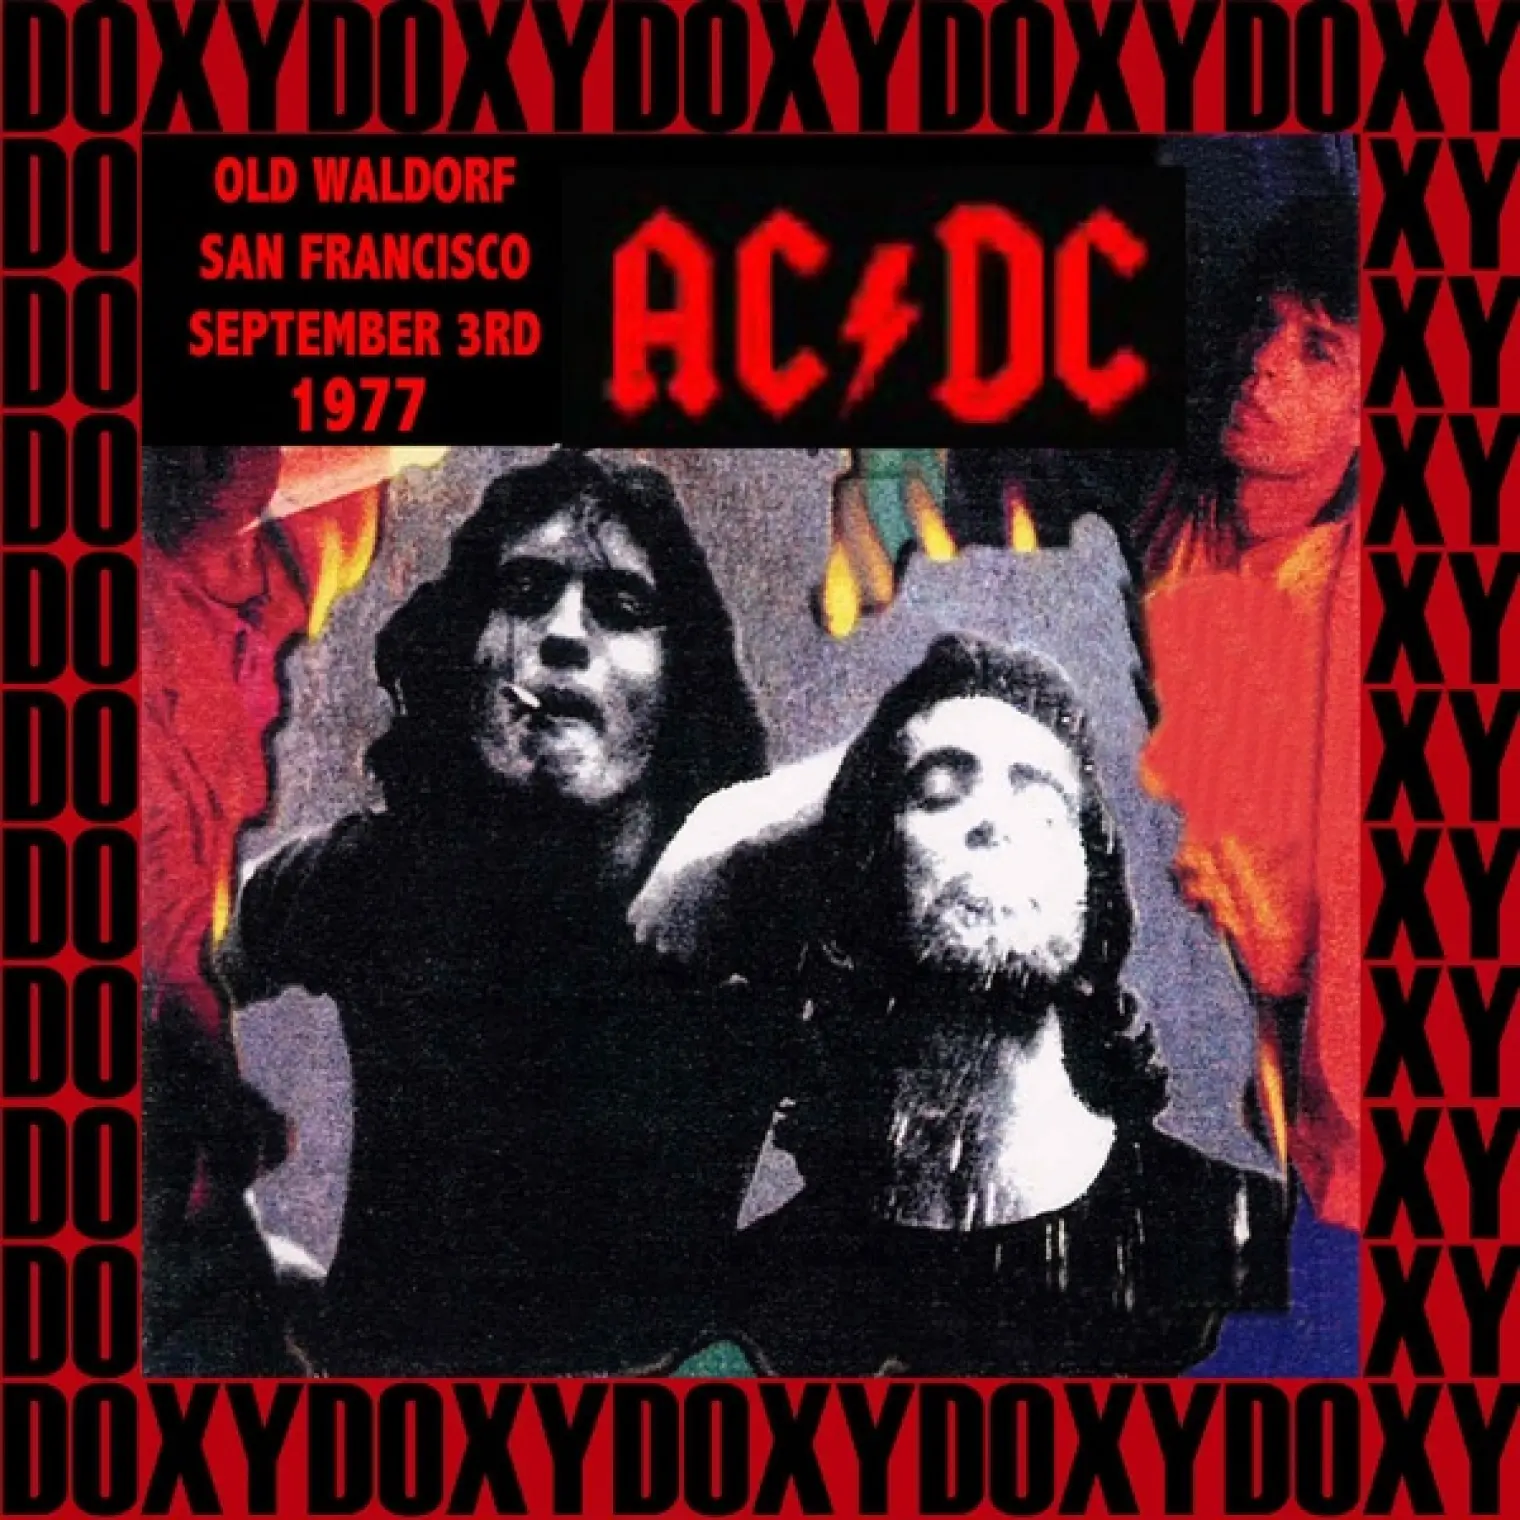 Old Waldorf, San Francisco, September 3rd, 1977 (Doxy Collection, Remastered, Live on Ksan Fm Broadcasting) -  AC/DC 